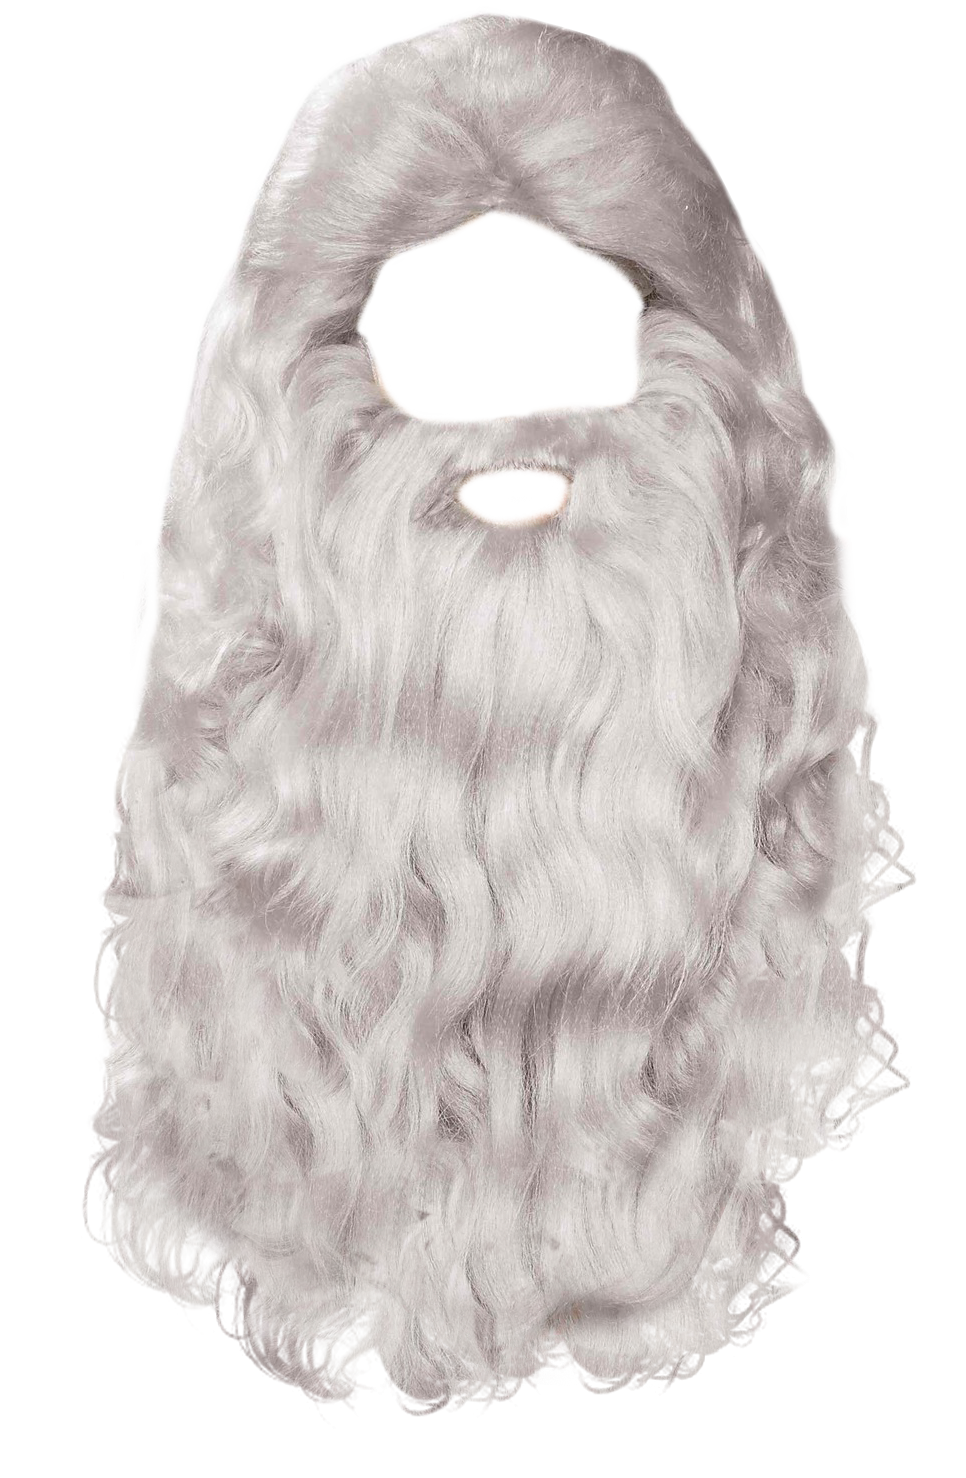 A White Beard With A Mustache